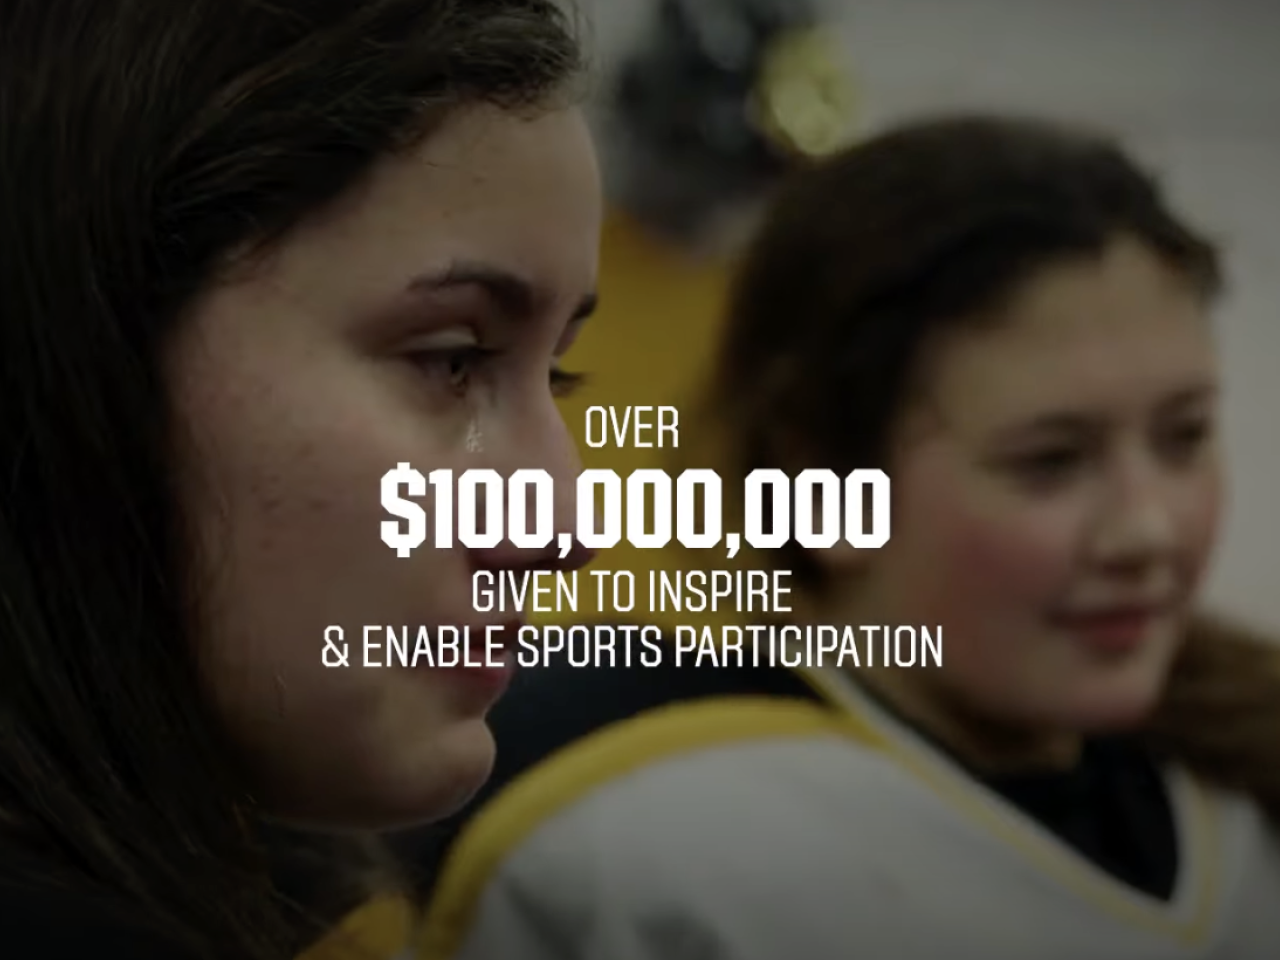 Over $100,000,000 given to inspire and enable sports participation.